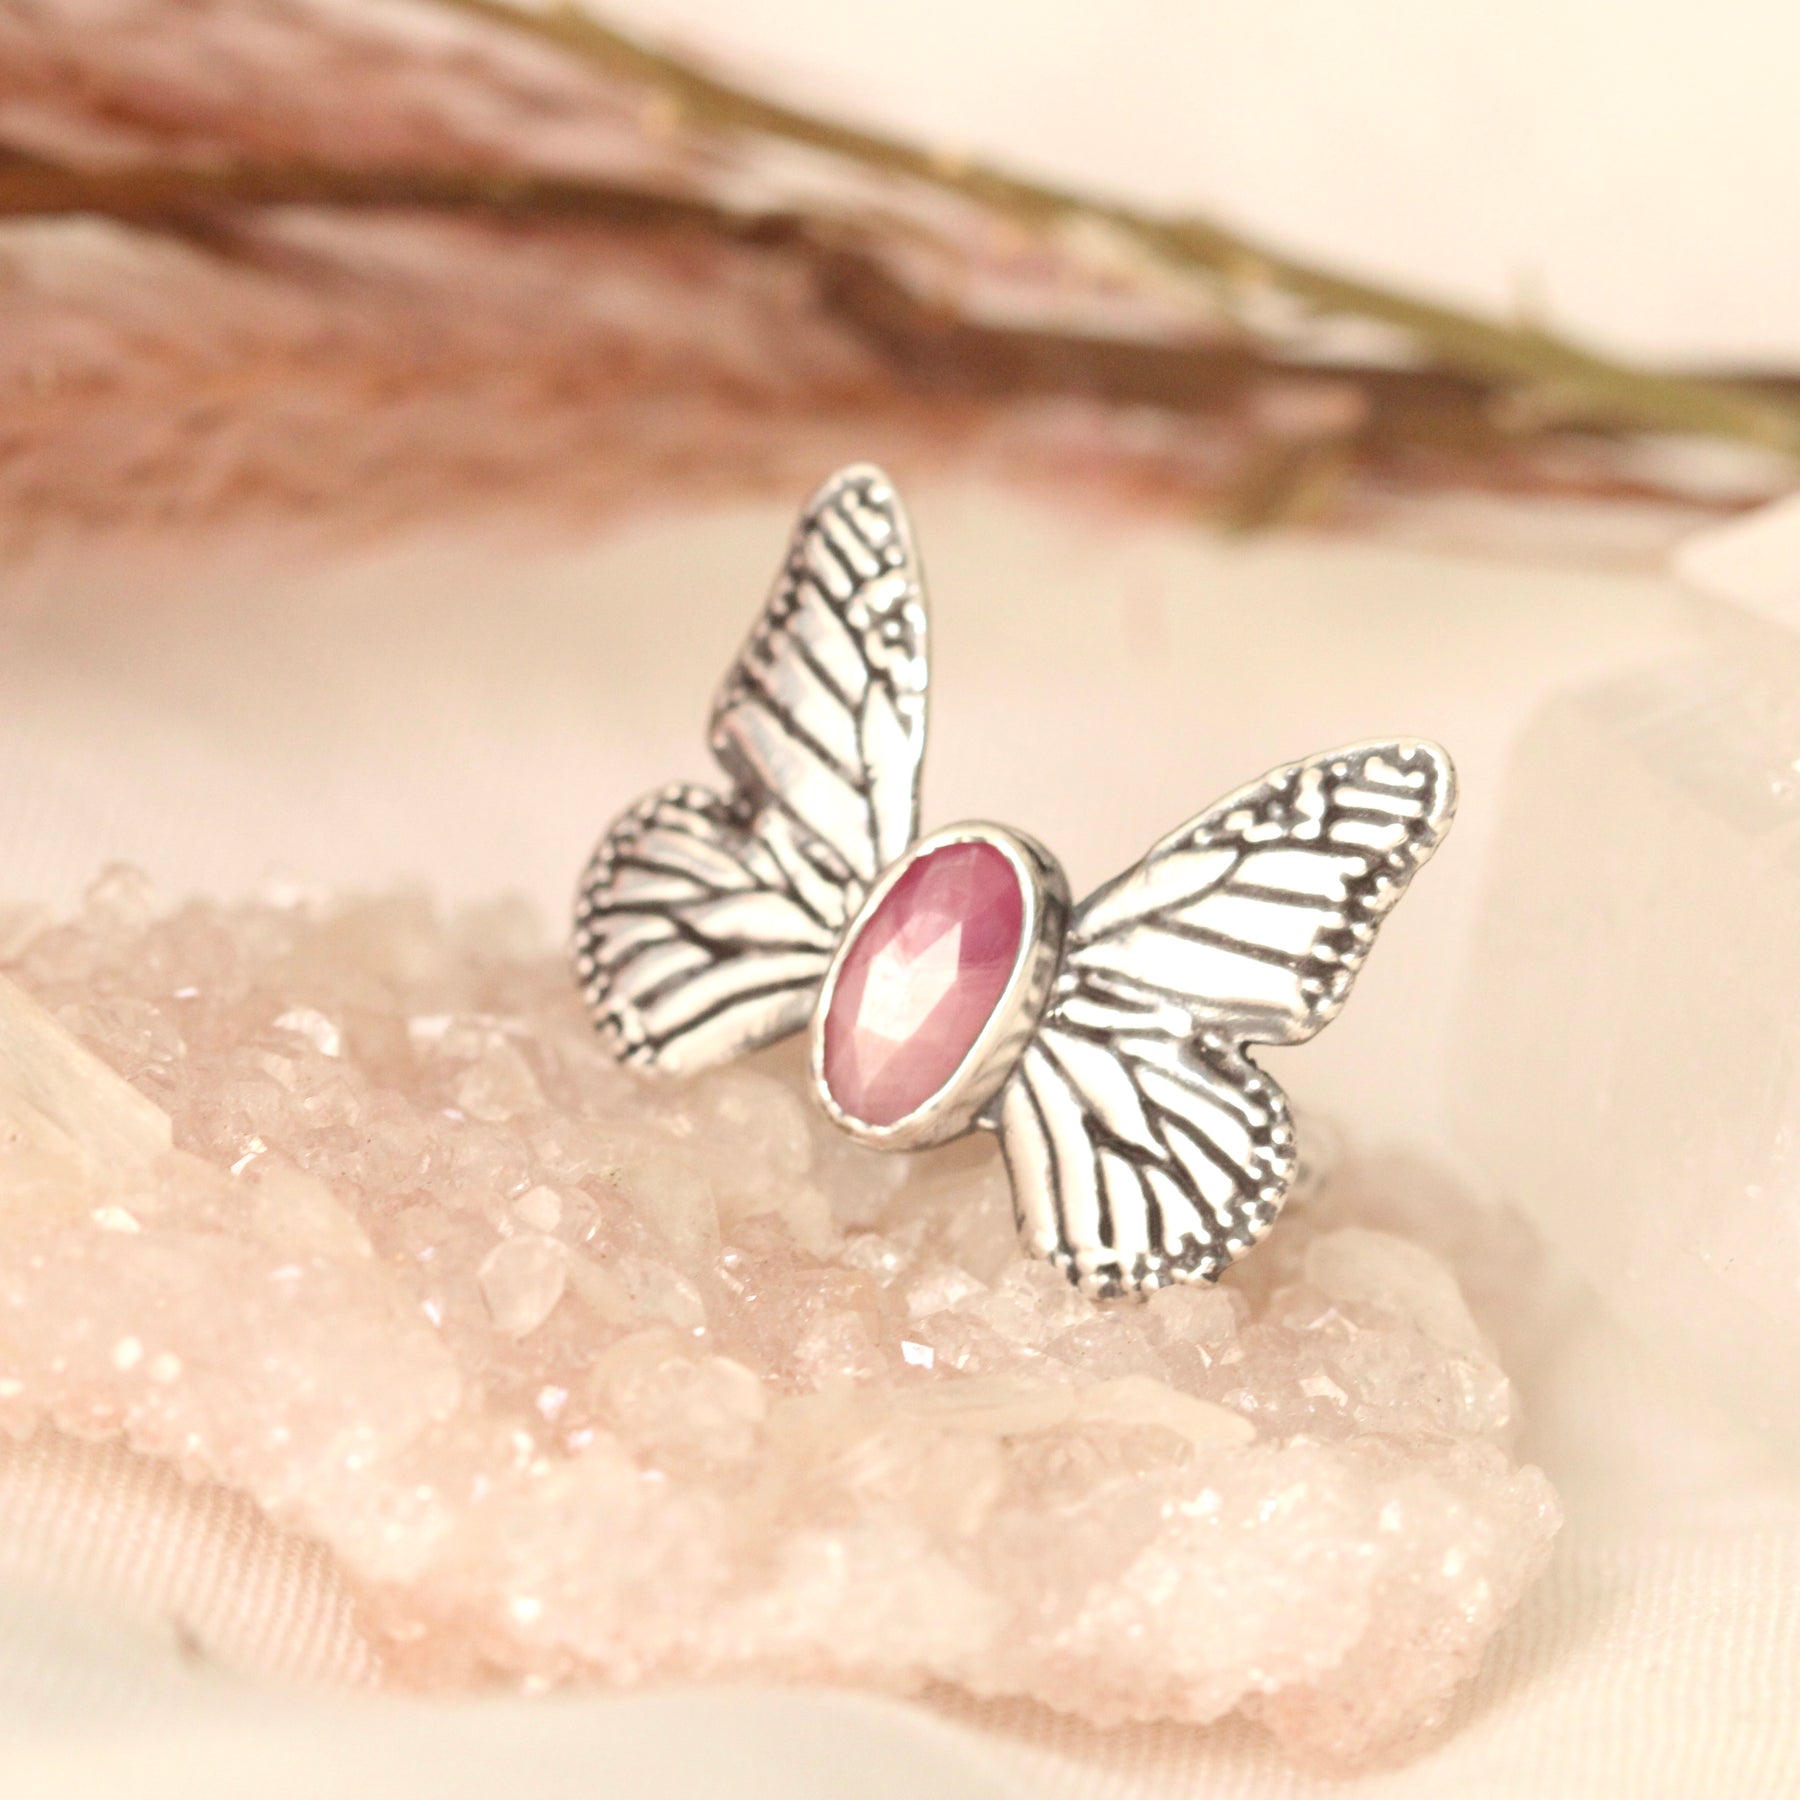 Monarch Butterfly Sterling Silver Ring with Ruby